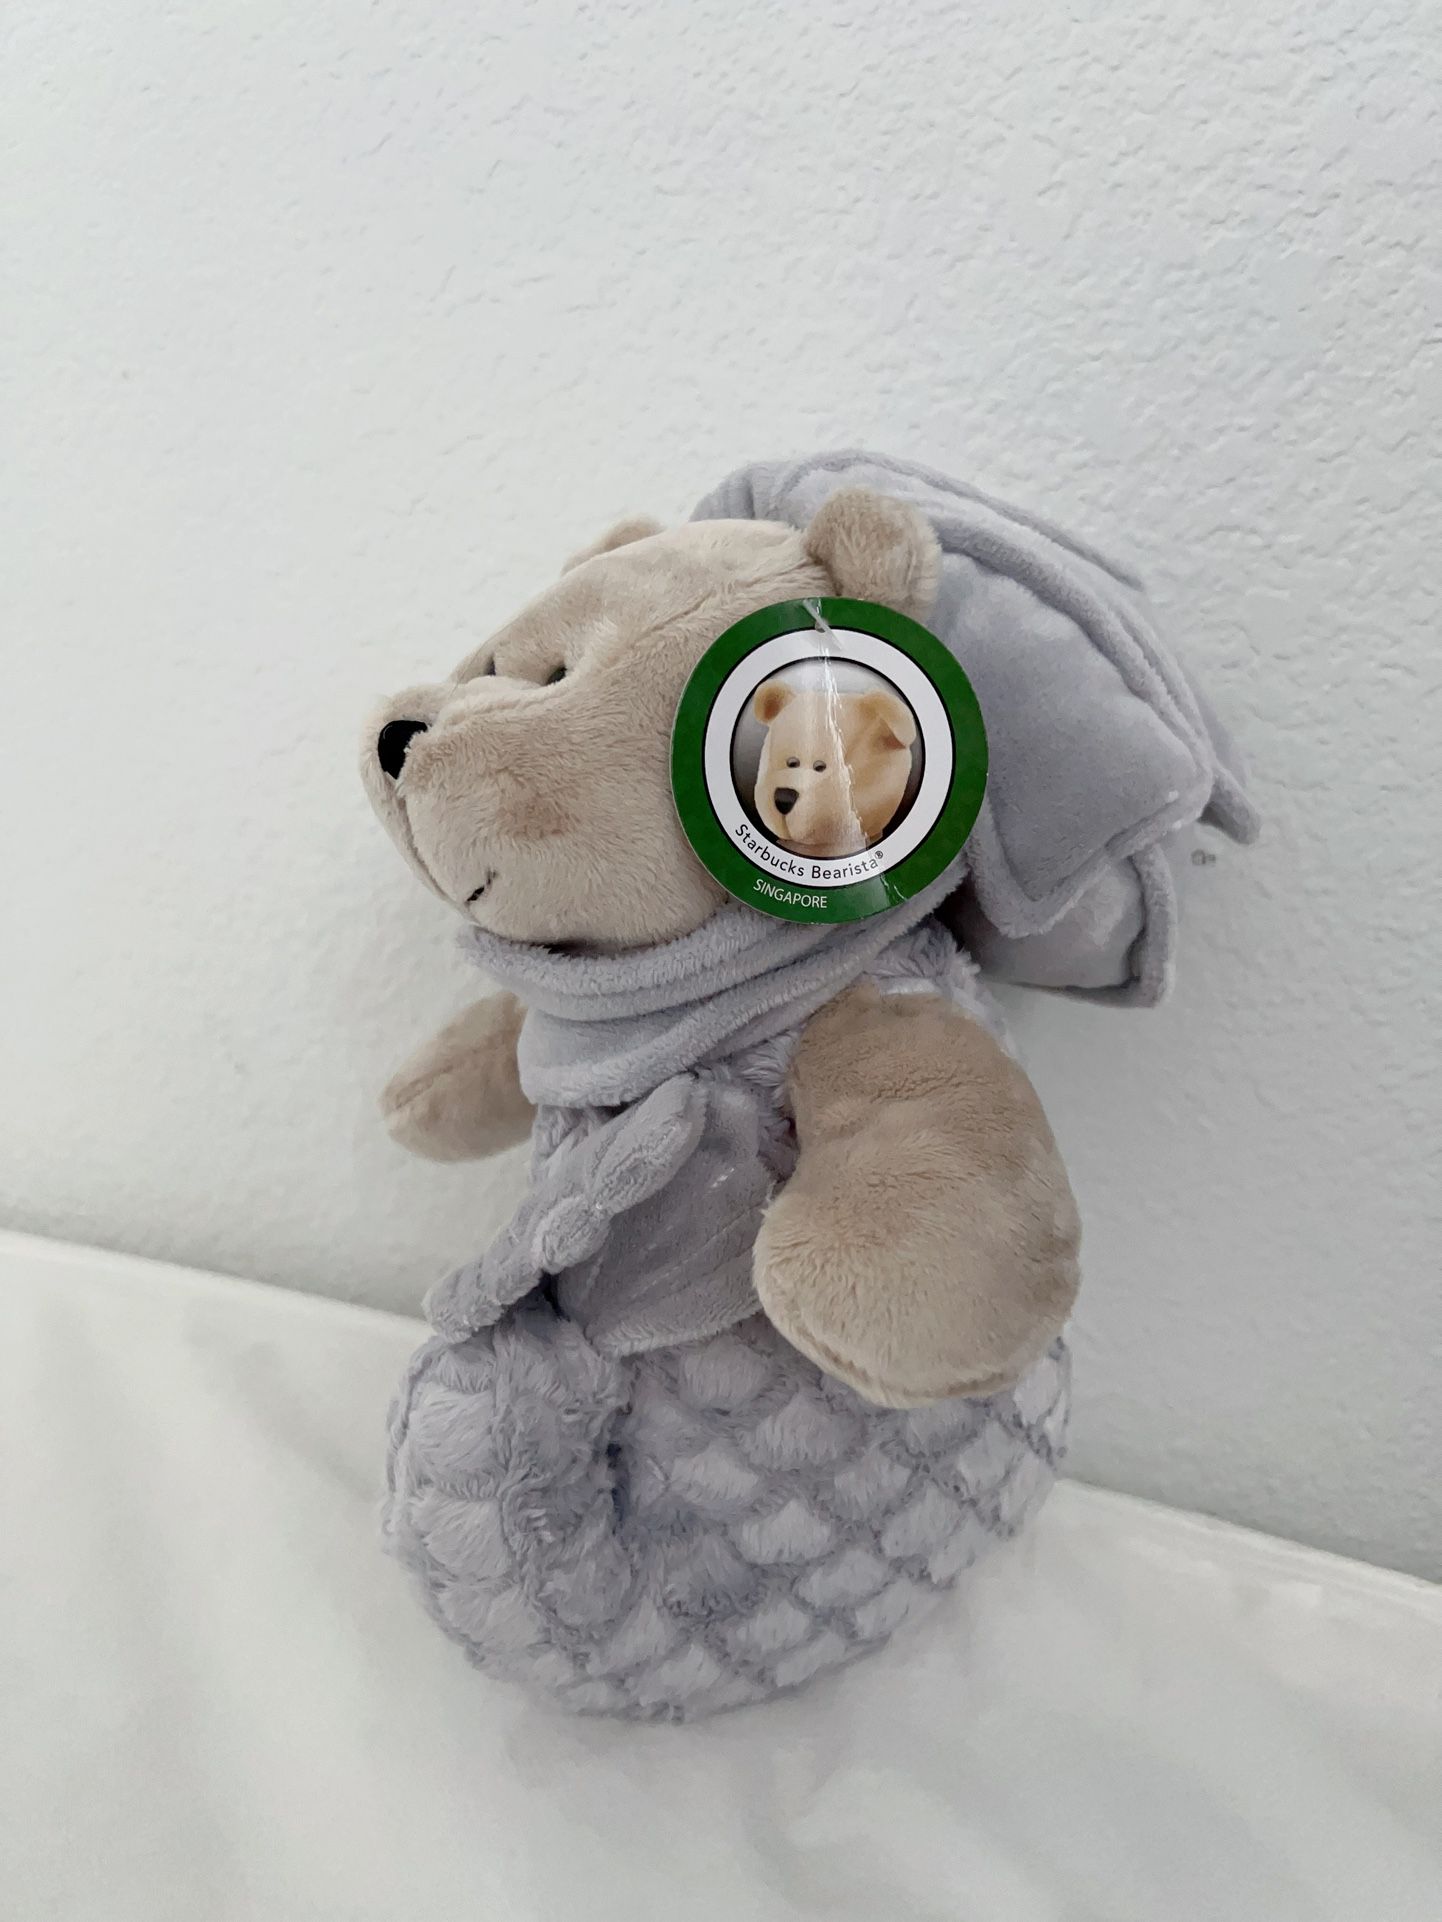 New with tag Starbucks 2017 Bearista Bear Singapore Merlion Plush Stuffed Animal Toy Size is about 8x10x4” Comes from pet free smoke free home 